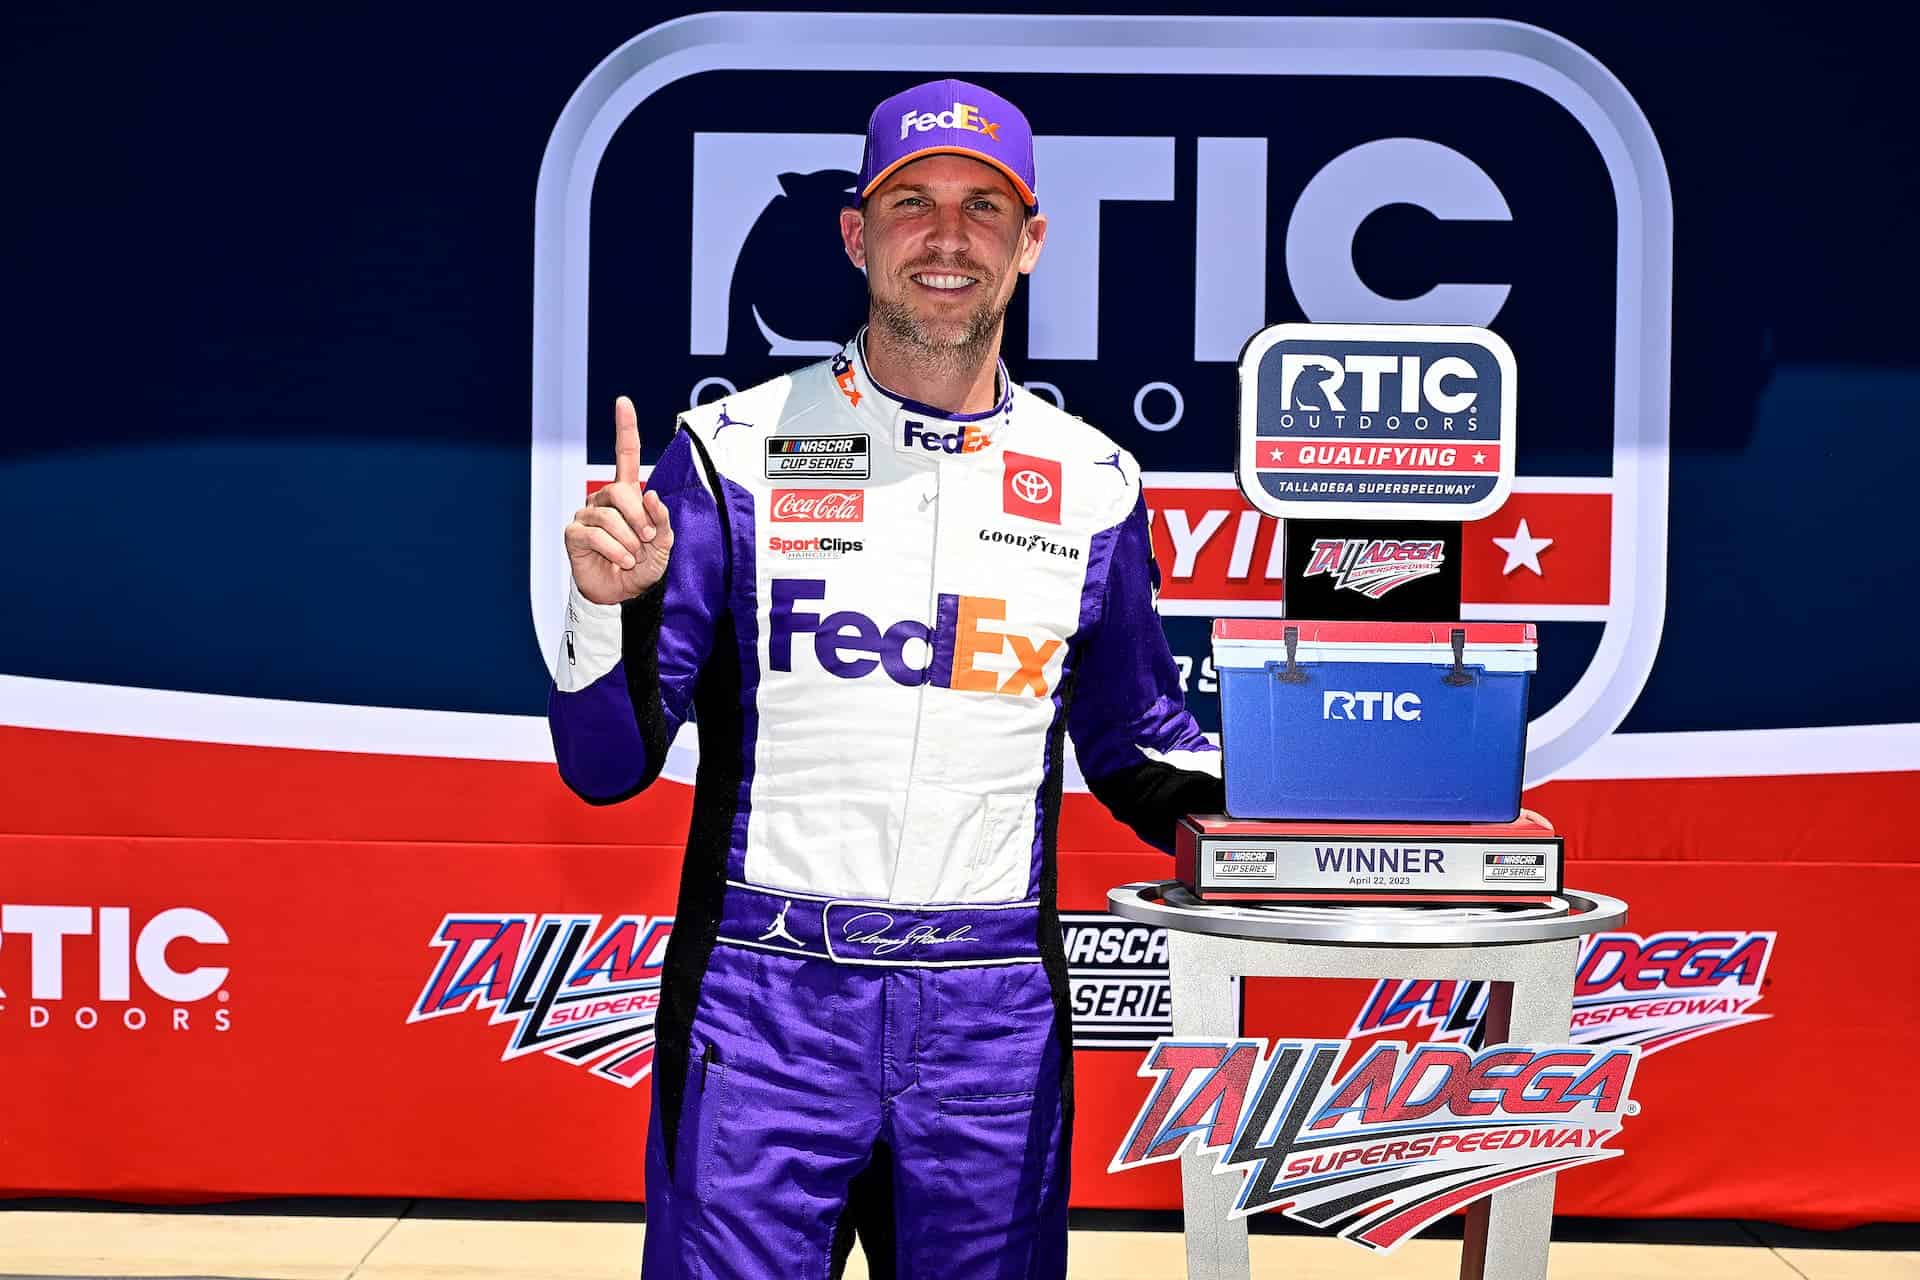 Denny Hamlin wins the pole for Sunday's Geico 500 at Talladega Superspeedway. Photo by Nigel Kinrade Photography.